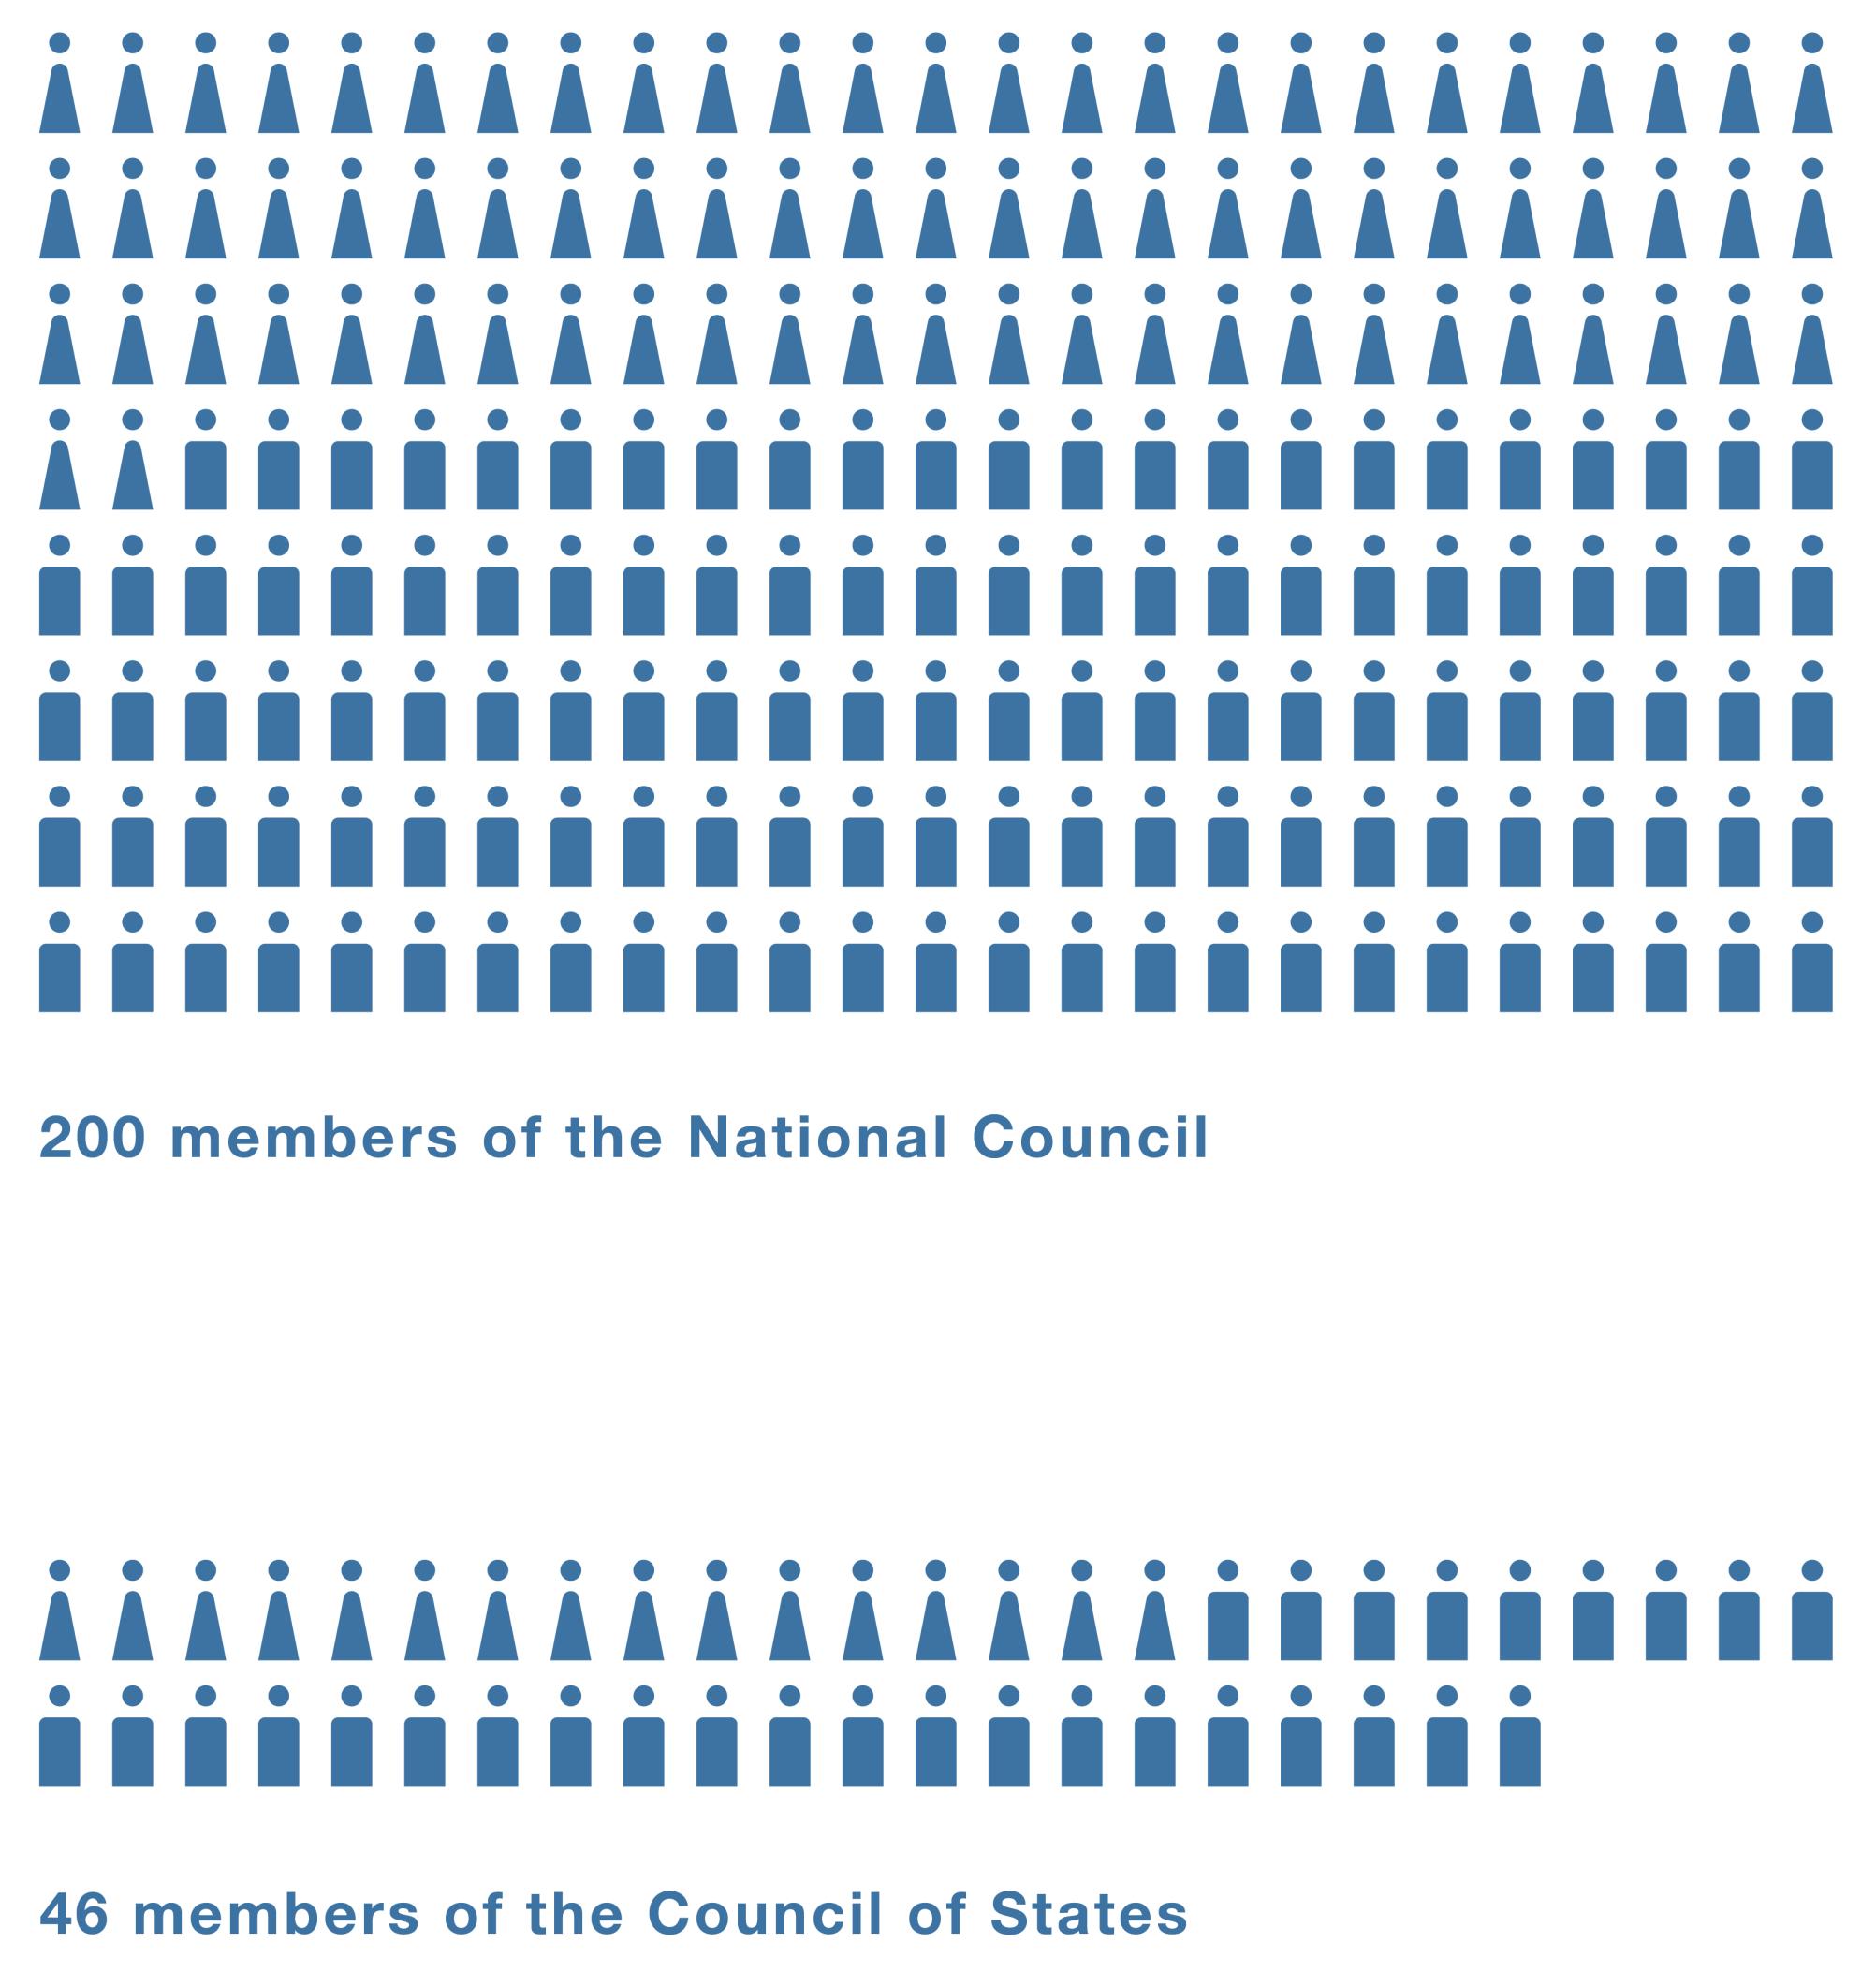 200 members of the National Council, 46 members of the Council of States